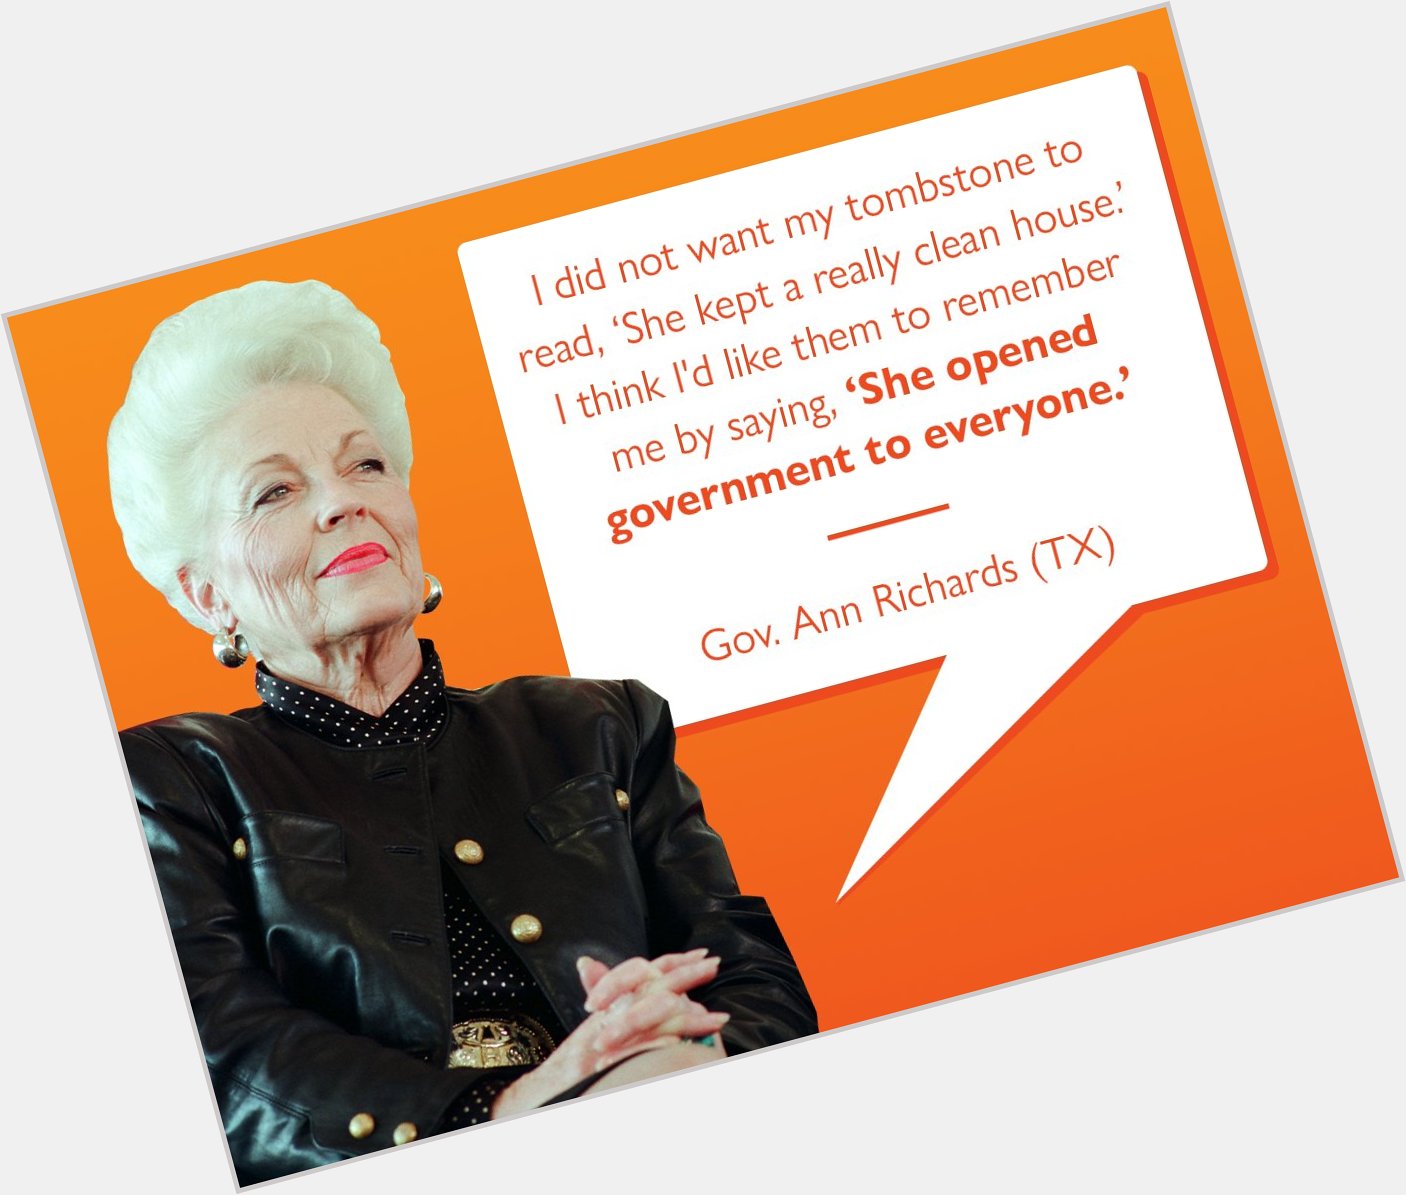 Happy birthday Ann Richards! Greg Abbott will never leave a legacy like yours. 